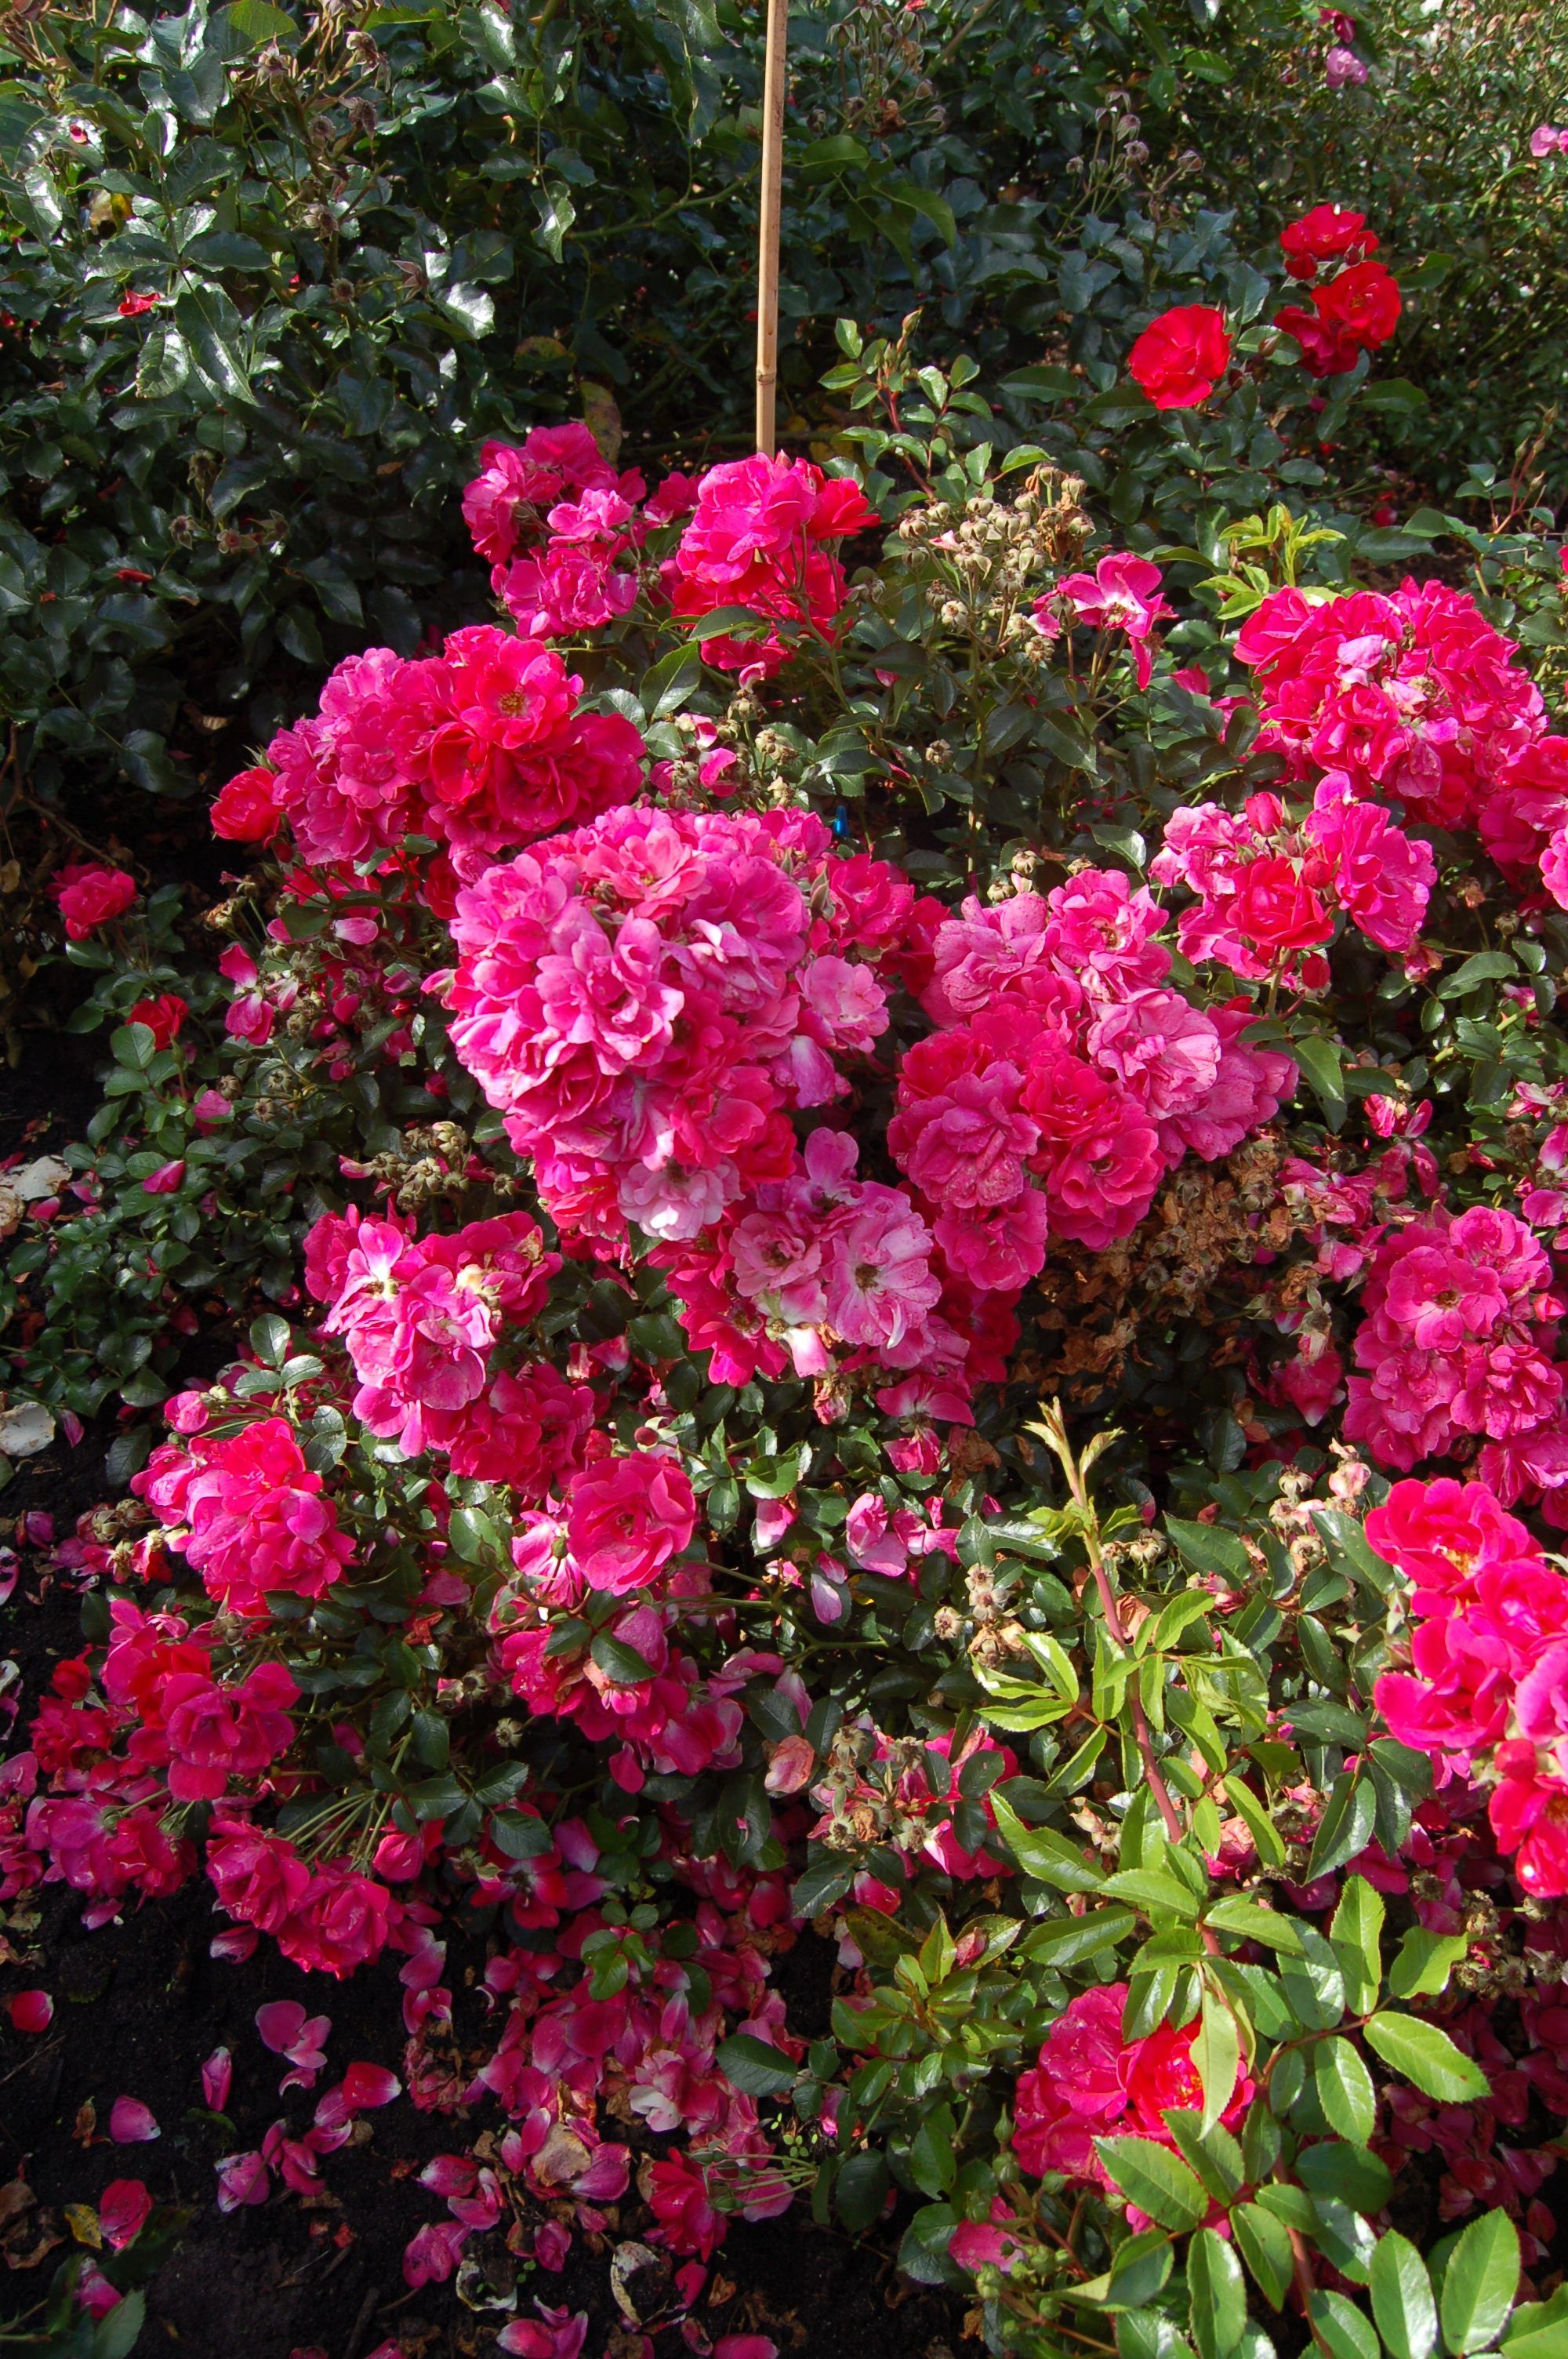 images/plants/rosa/ros-nitty-gritty-pink/ros-nitty-gritty-pink-0001.jpg